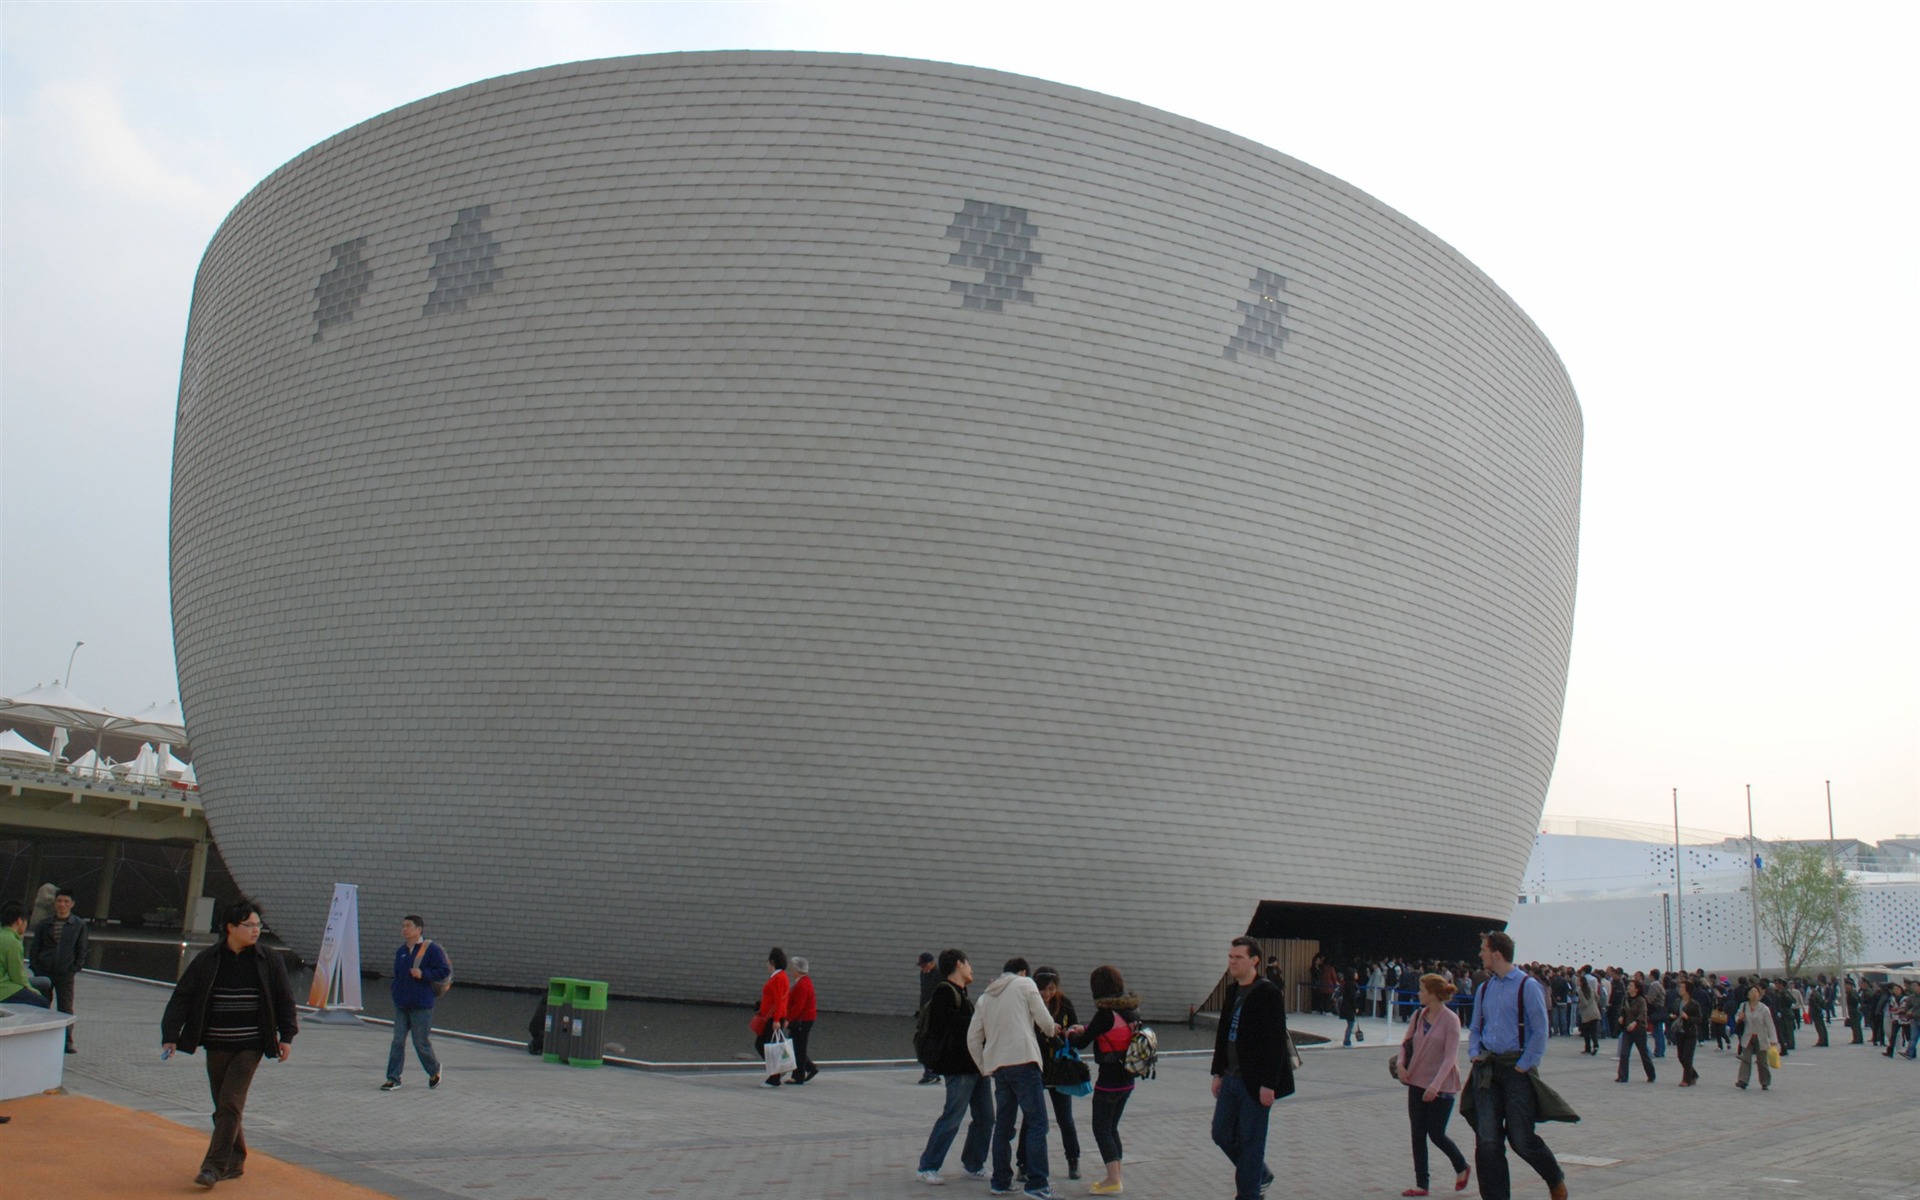 Commissioning of the 2010 Shanghai World Expo (studious works) #24 - 1920x1200